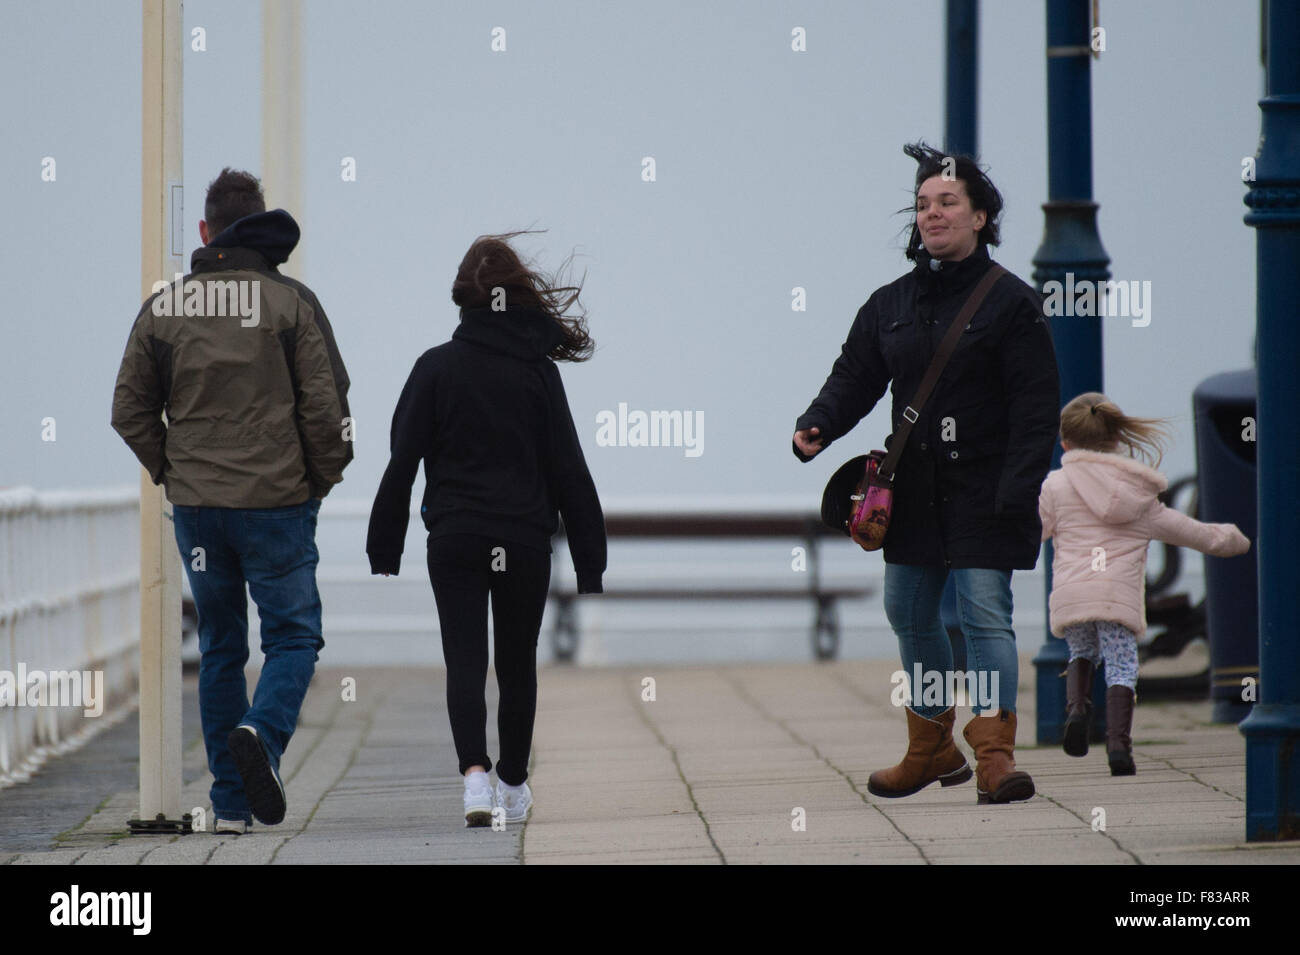 Aberystwyth Wales UK, Saturday 05 December 2015  A family get blown about on the promenade as the fourth named storm of the season, Storm Desmond, picks up strength and begins to batter the coast at Aberystwyth, west Wales  photo: © Keith Morris / Alamy Live  News Stock Photo